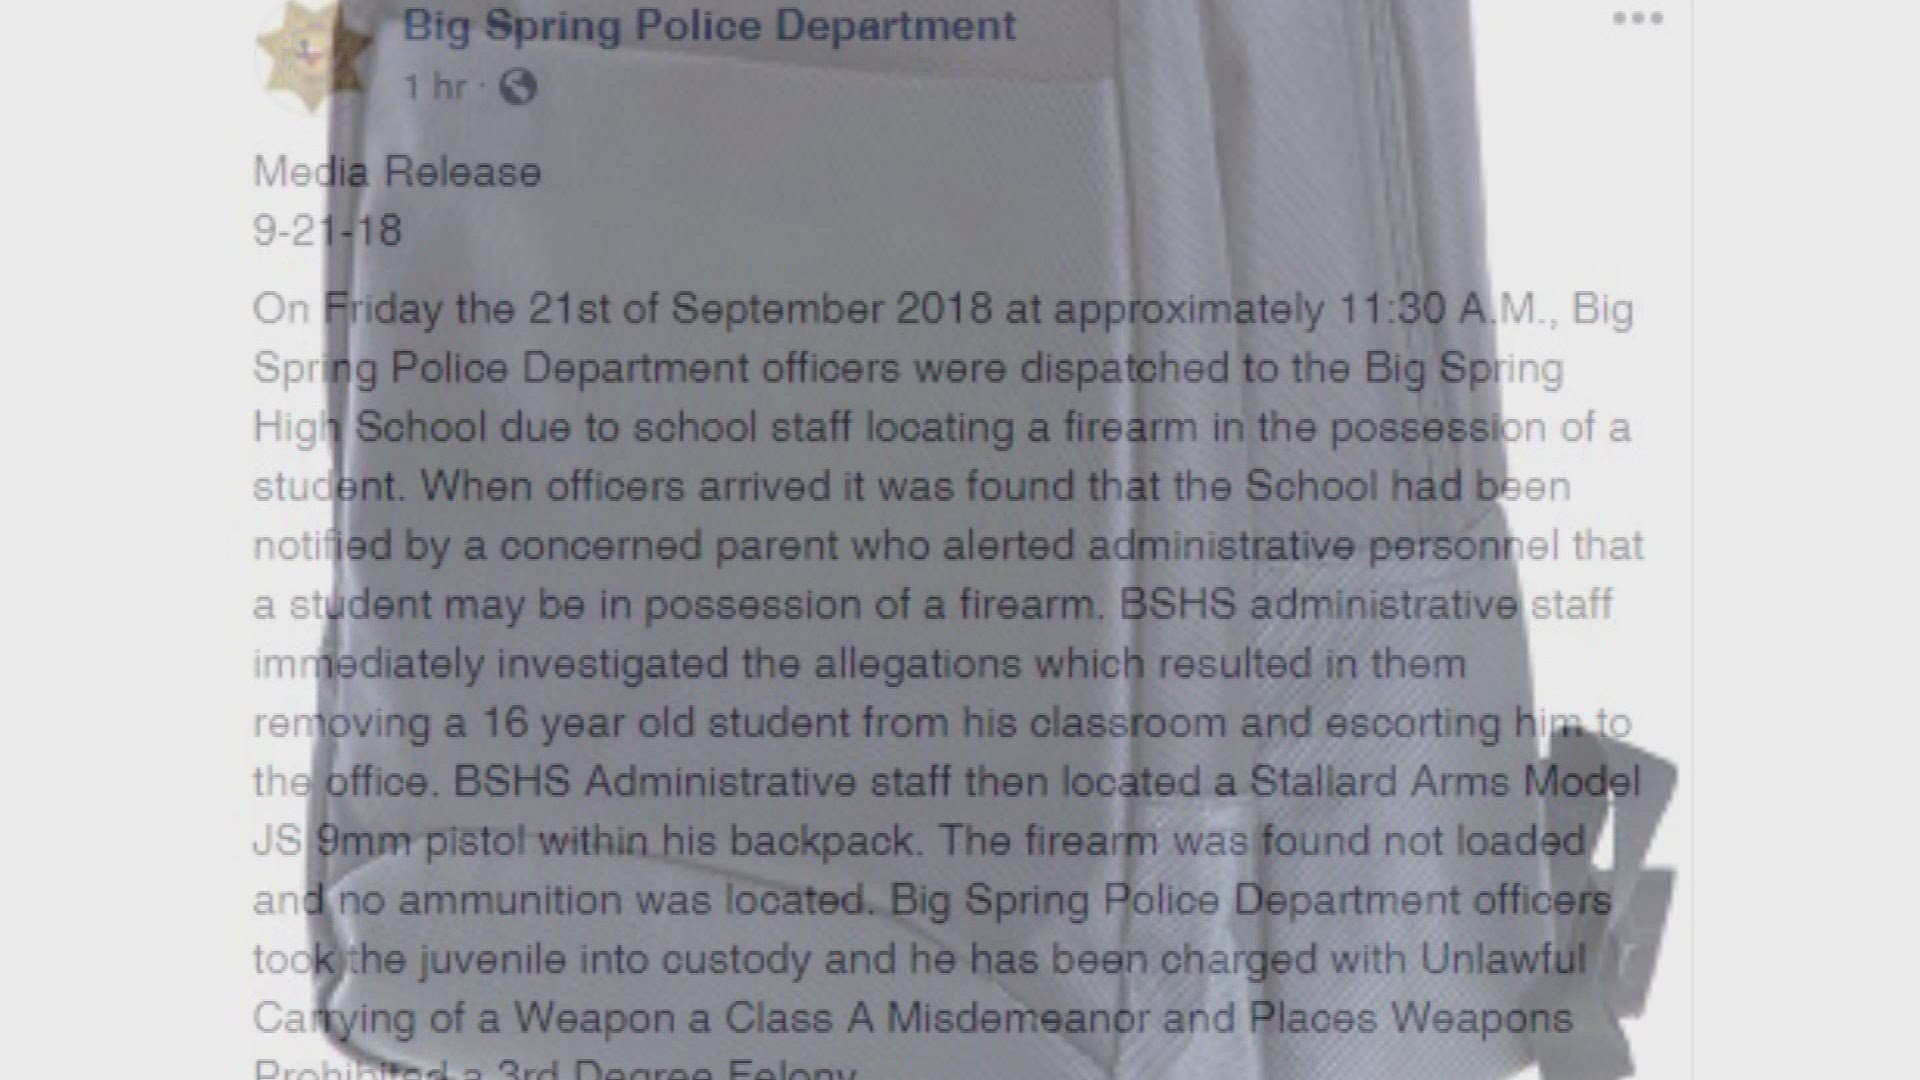 On Friday the 21st of September 2018 at approximately 11:30 A.M., Big Spring Police Department officers were dispatched to the Big Spring High School due to school staff locating a firearm in the possession of a student. When officers arrived it was found